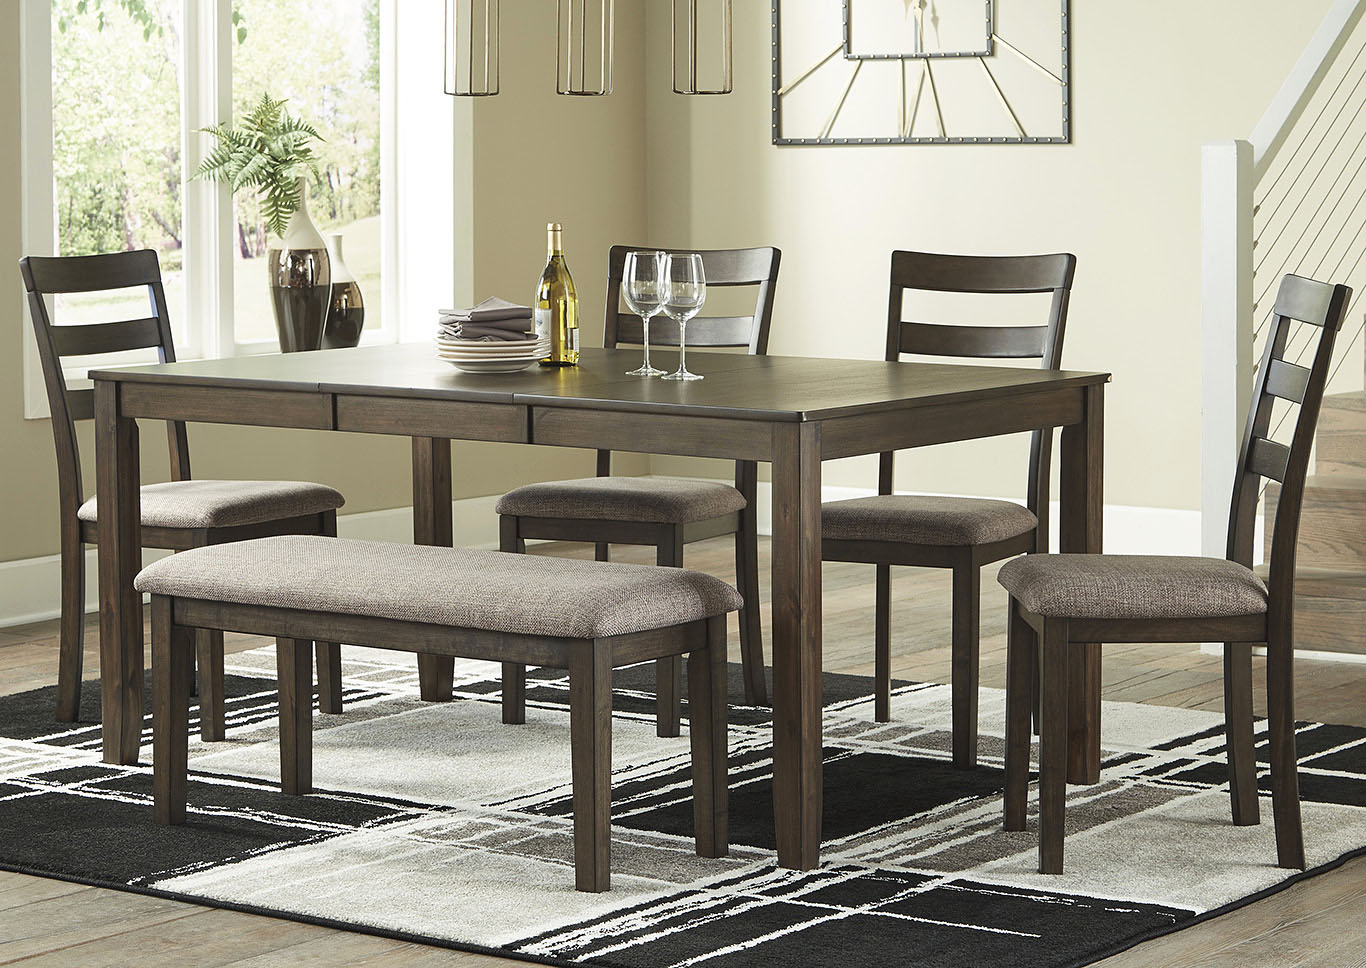 dining room table layaway